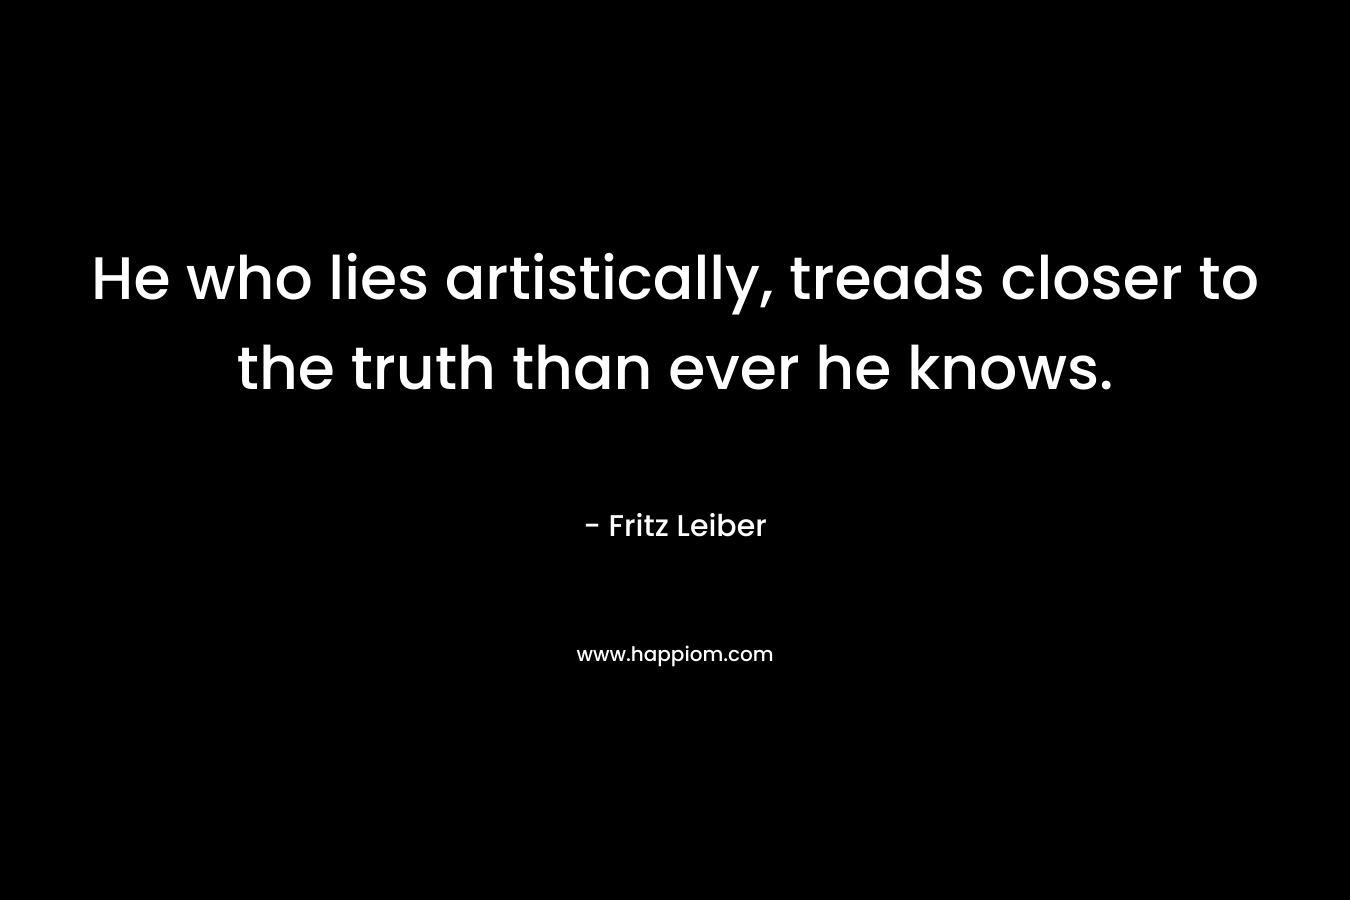 He who lies artistically, treads closer to the truth than ever he knows. – Fritz Leiber